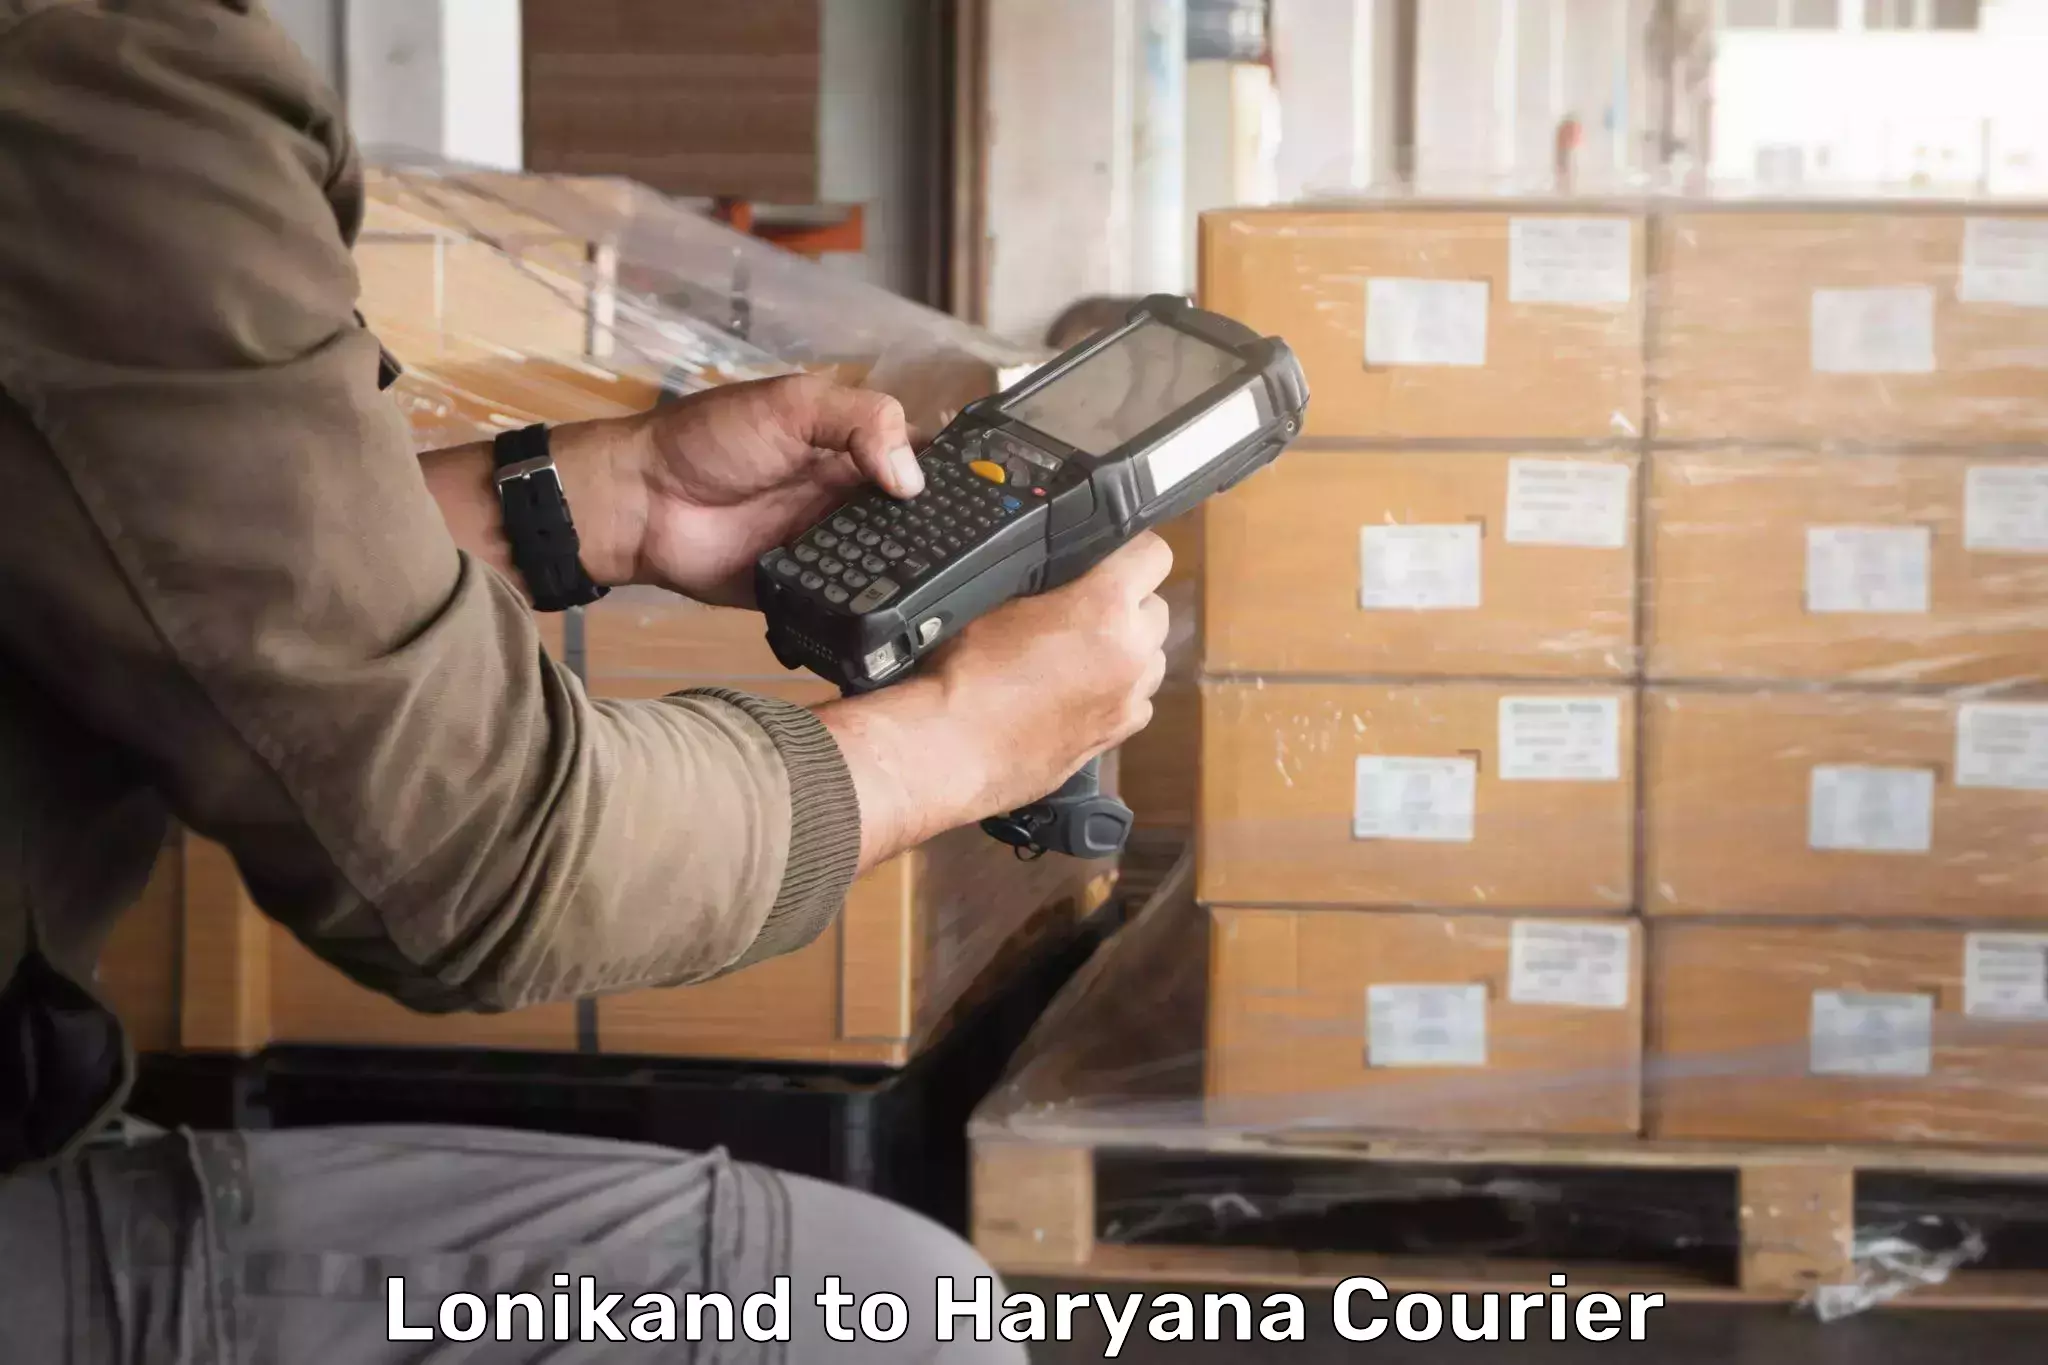 Seamless shipping experience in Lonikand to NCR Haryana